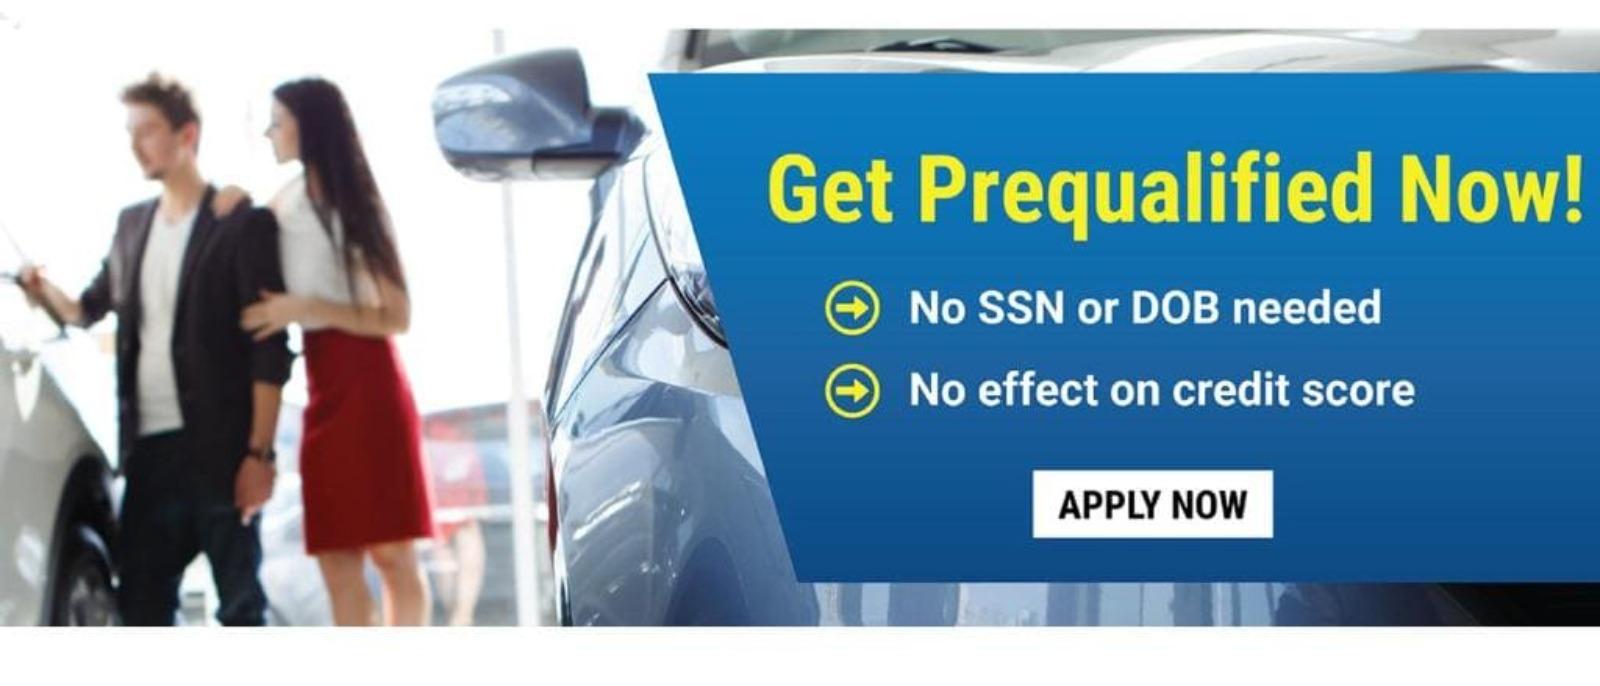 Get Prequalified Now! No SSN or DOB needed No effect on credit score